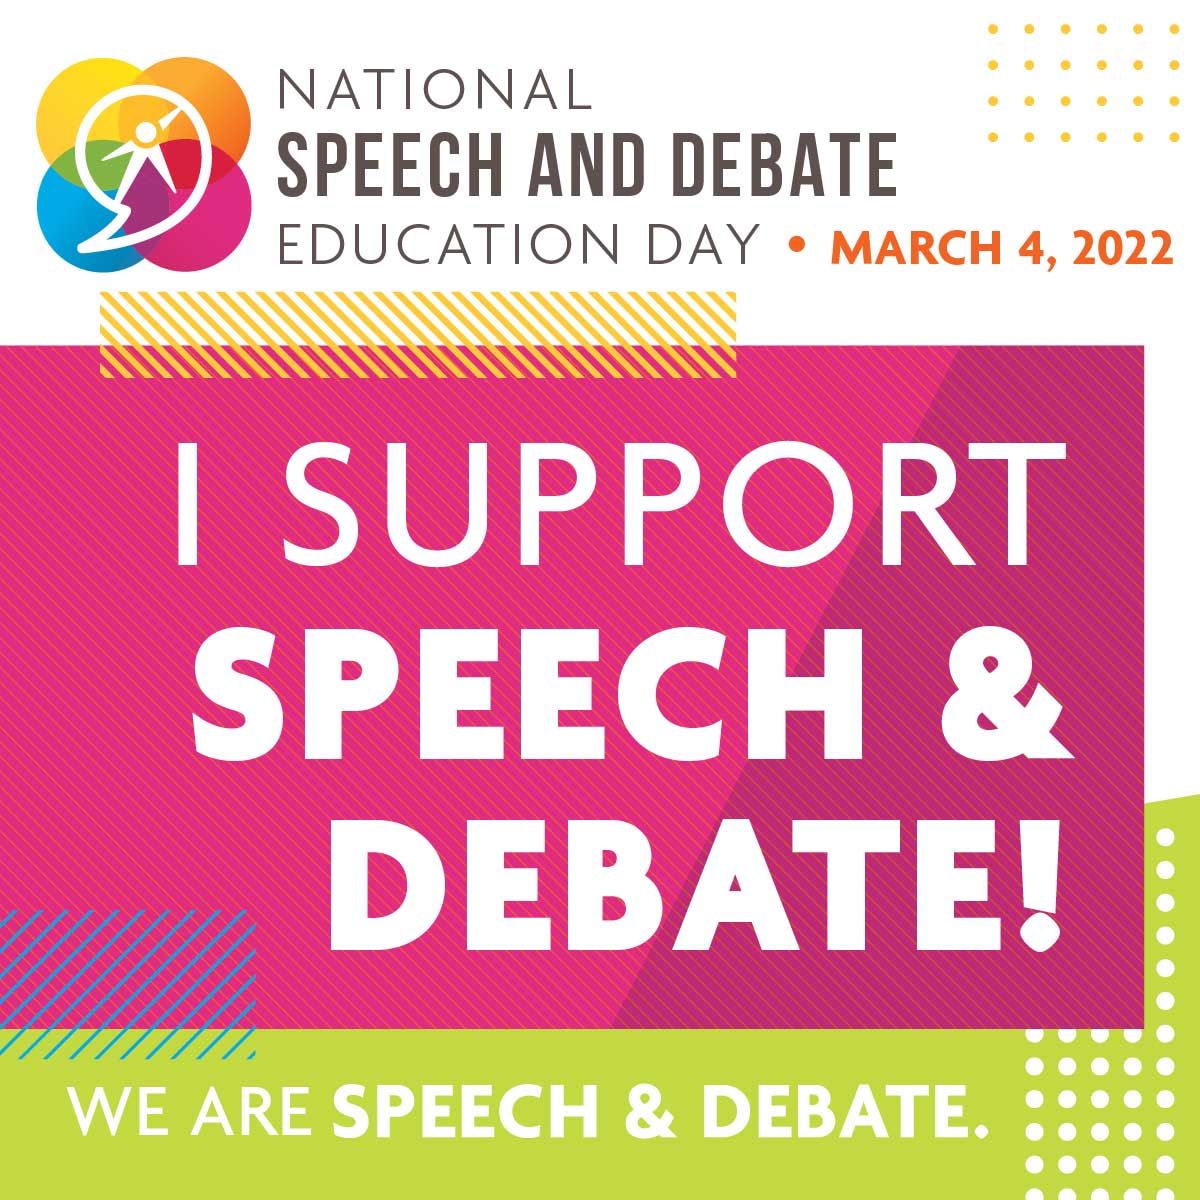 I Support Speech and Debate!